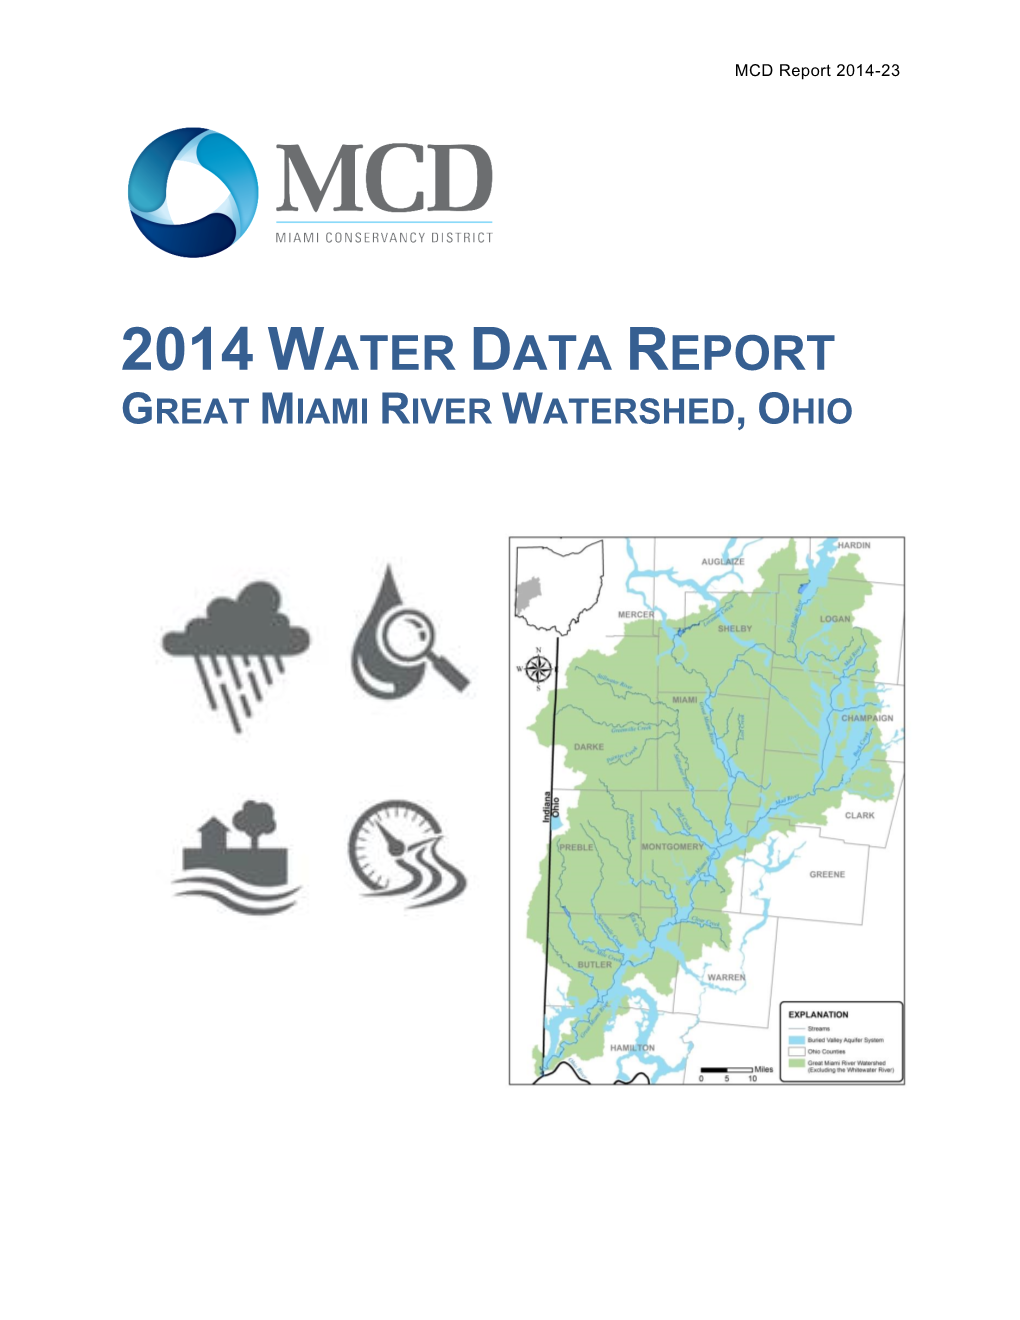 Water Resources Report for the Great Miami River Watershed 1